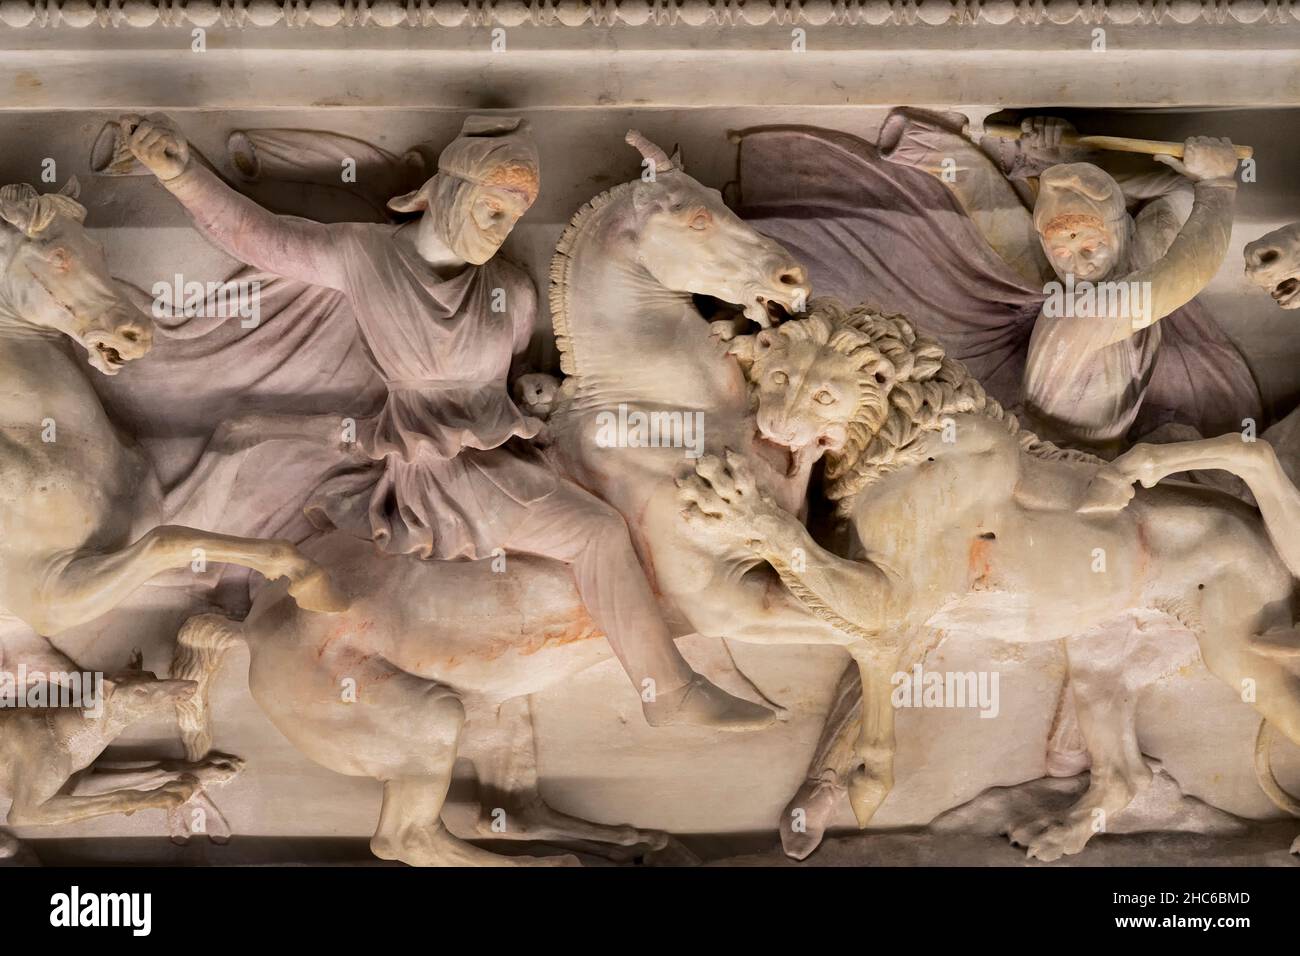 Close up view of Alexander Sarcophagus Istanbul Archaeology Museum. Stock Photo